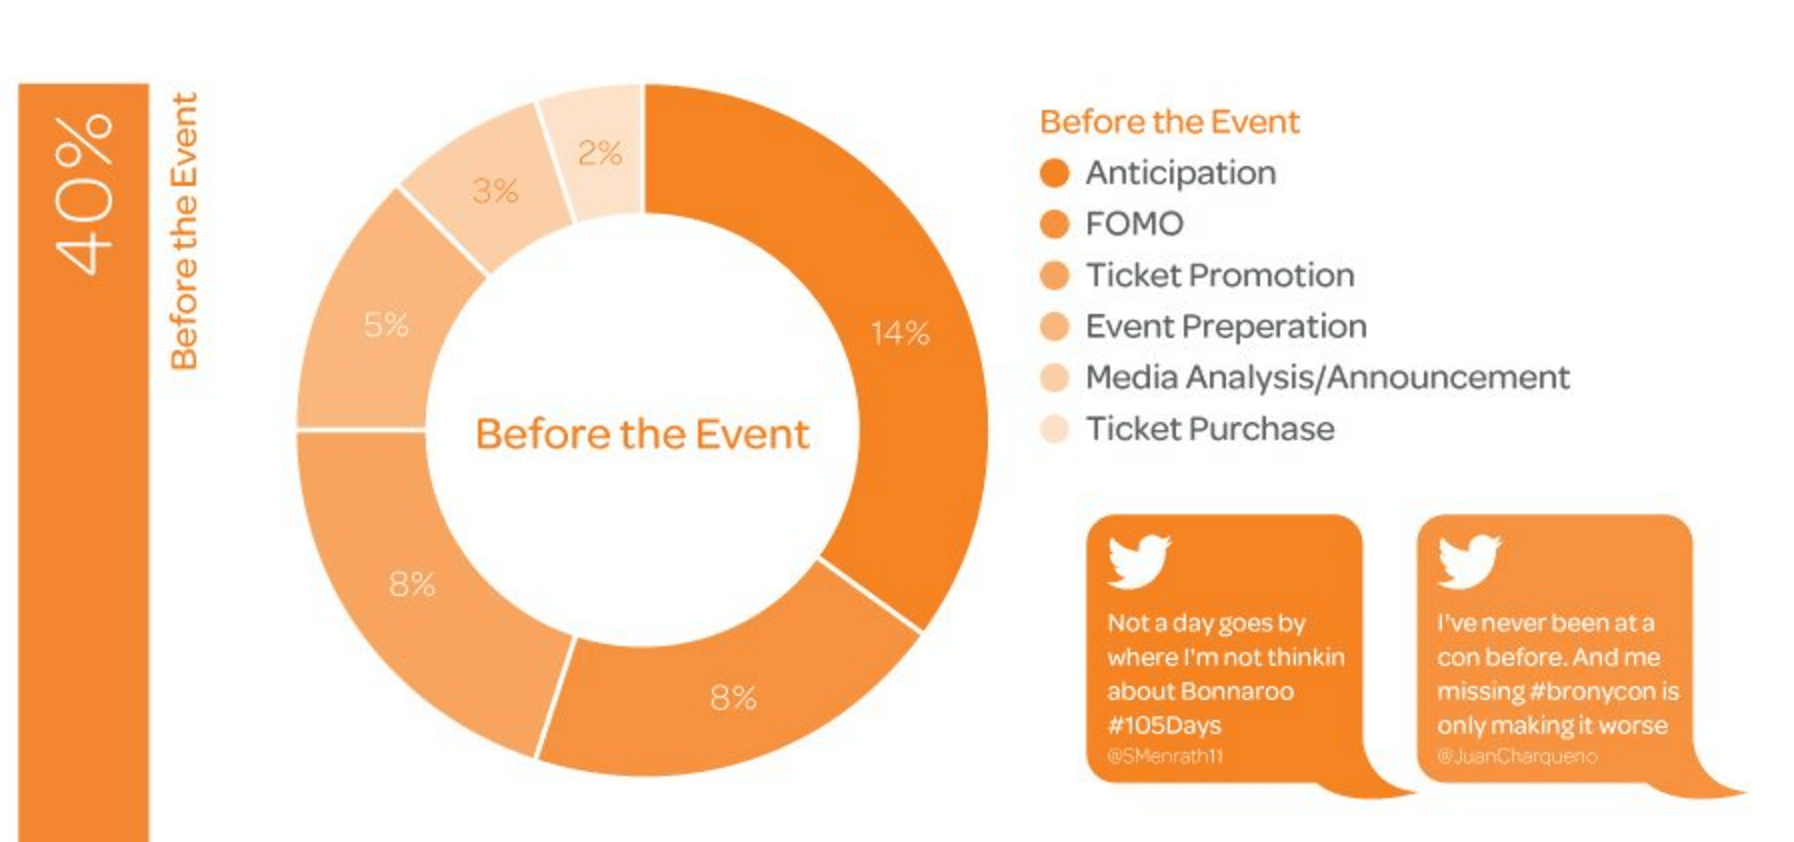 Social media event marketing - before the event